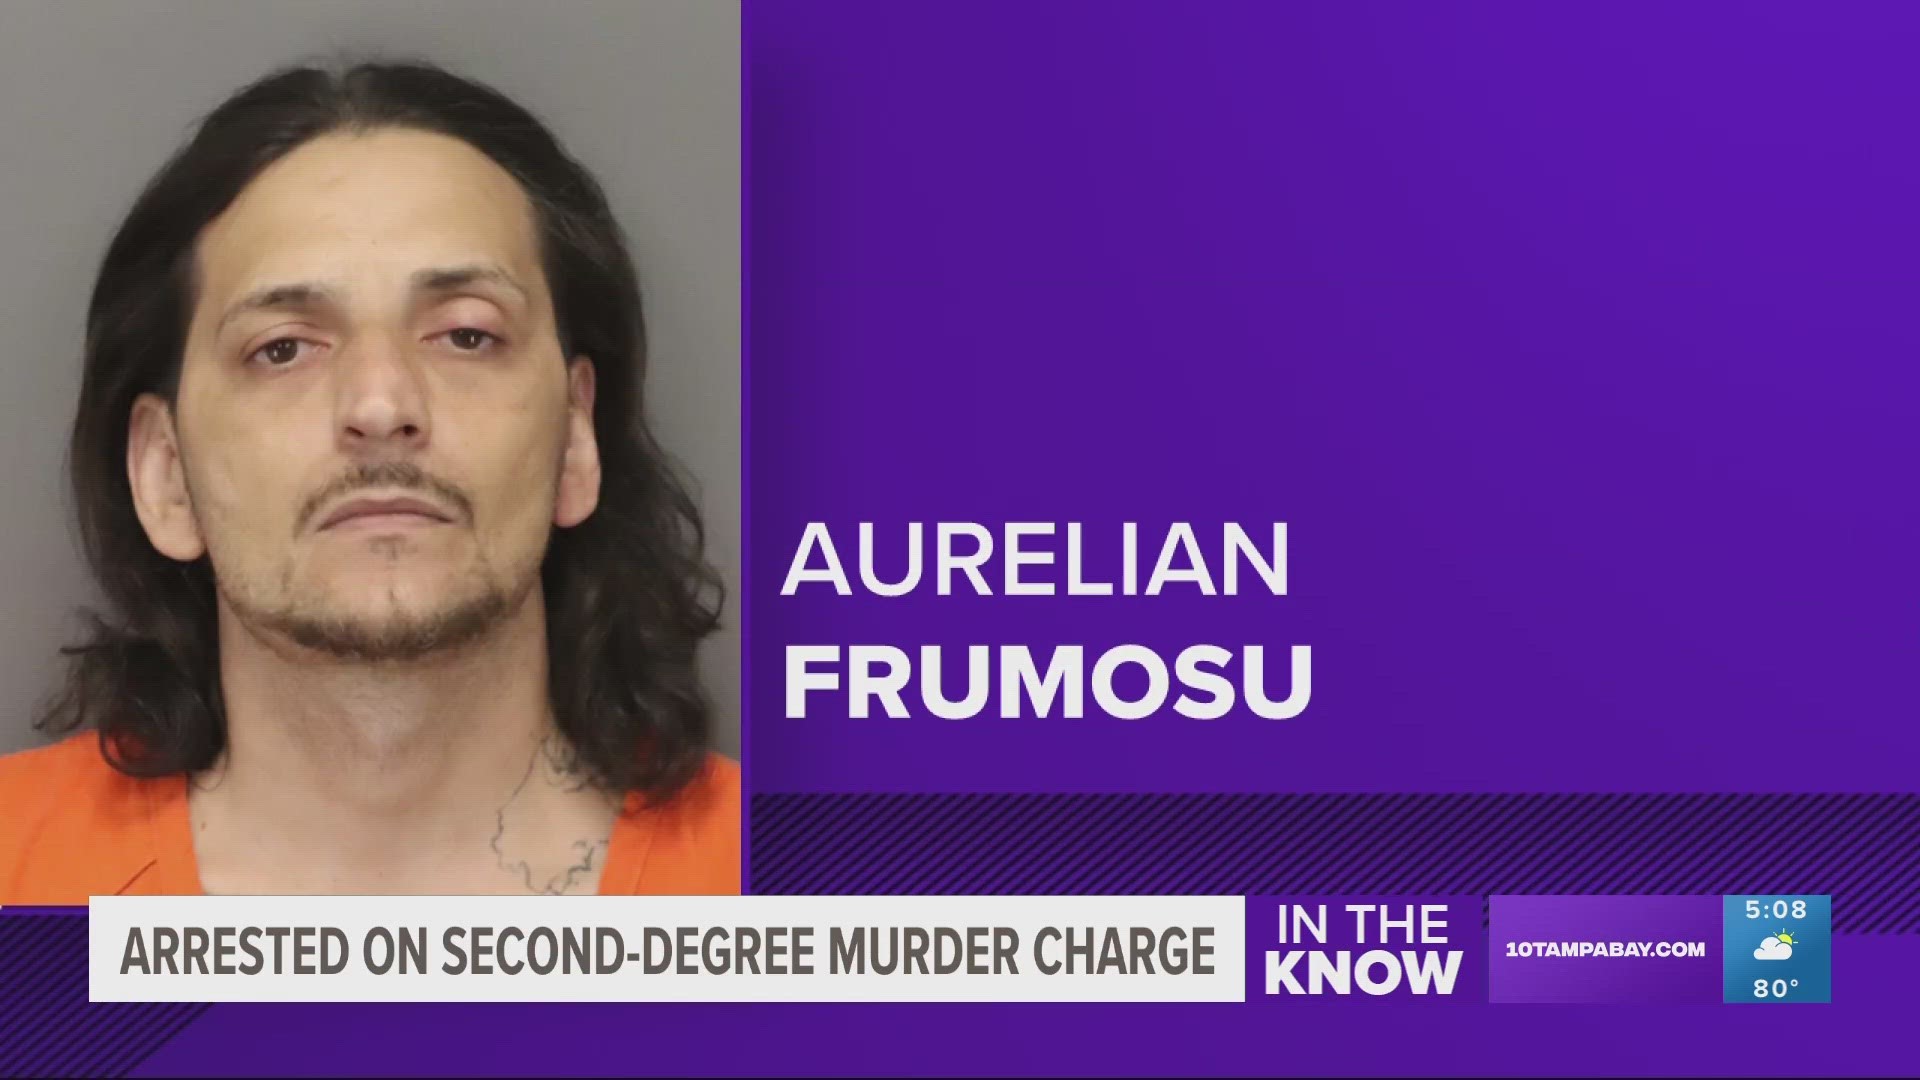 Aurelian Frumosu was charged with second-degree murder and armed burglary.